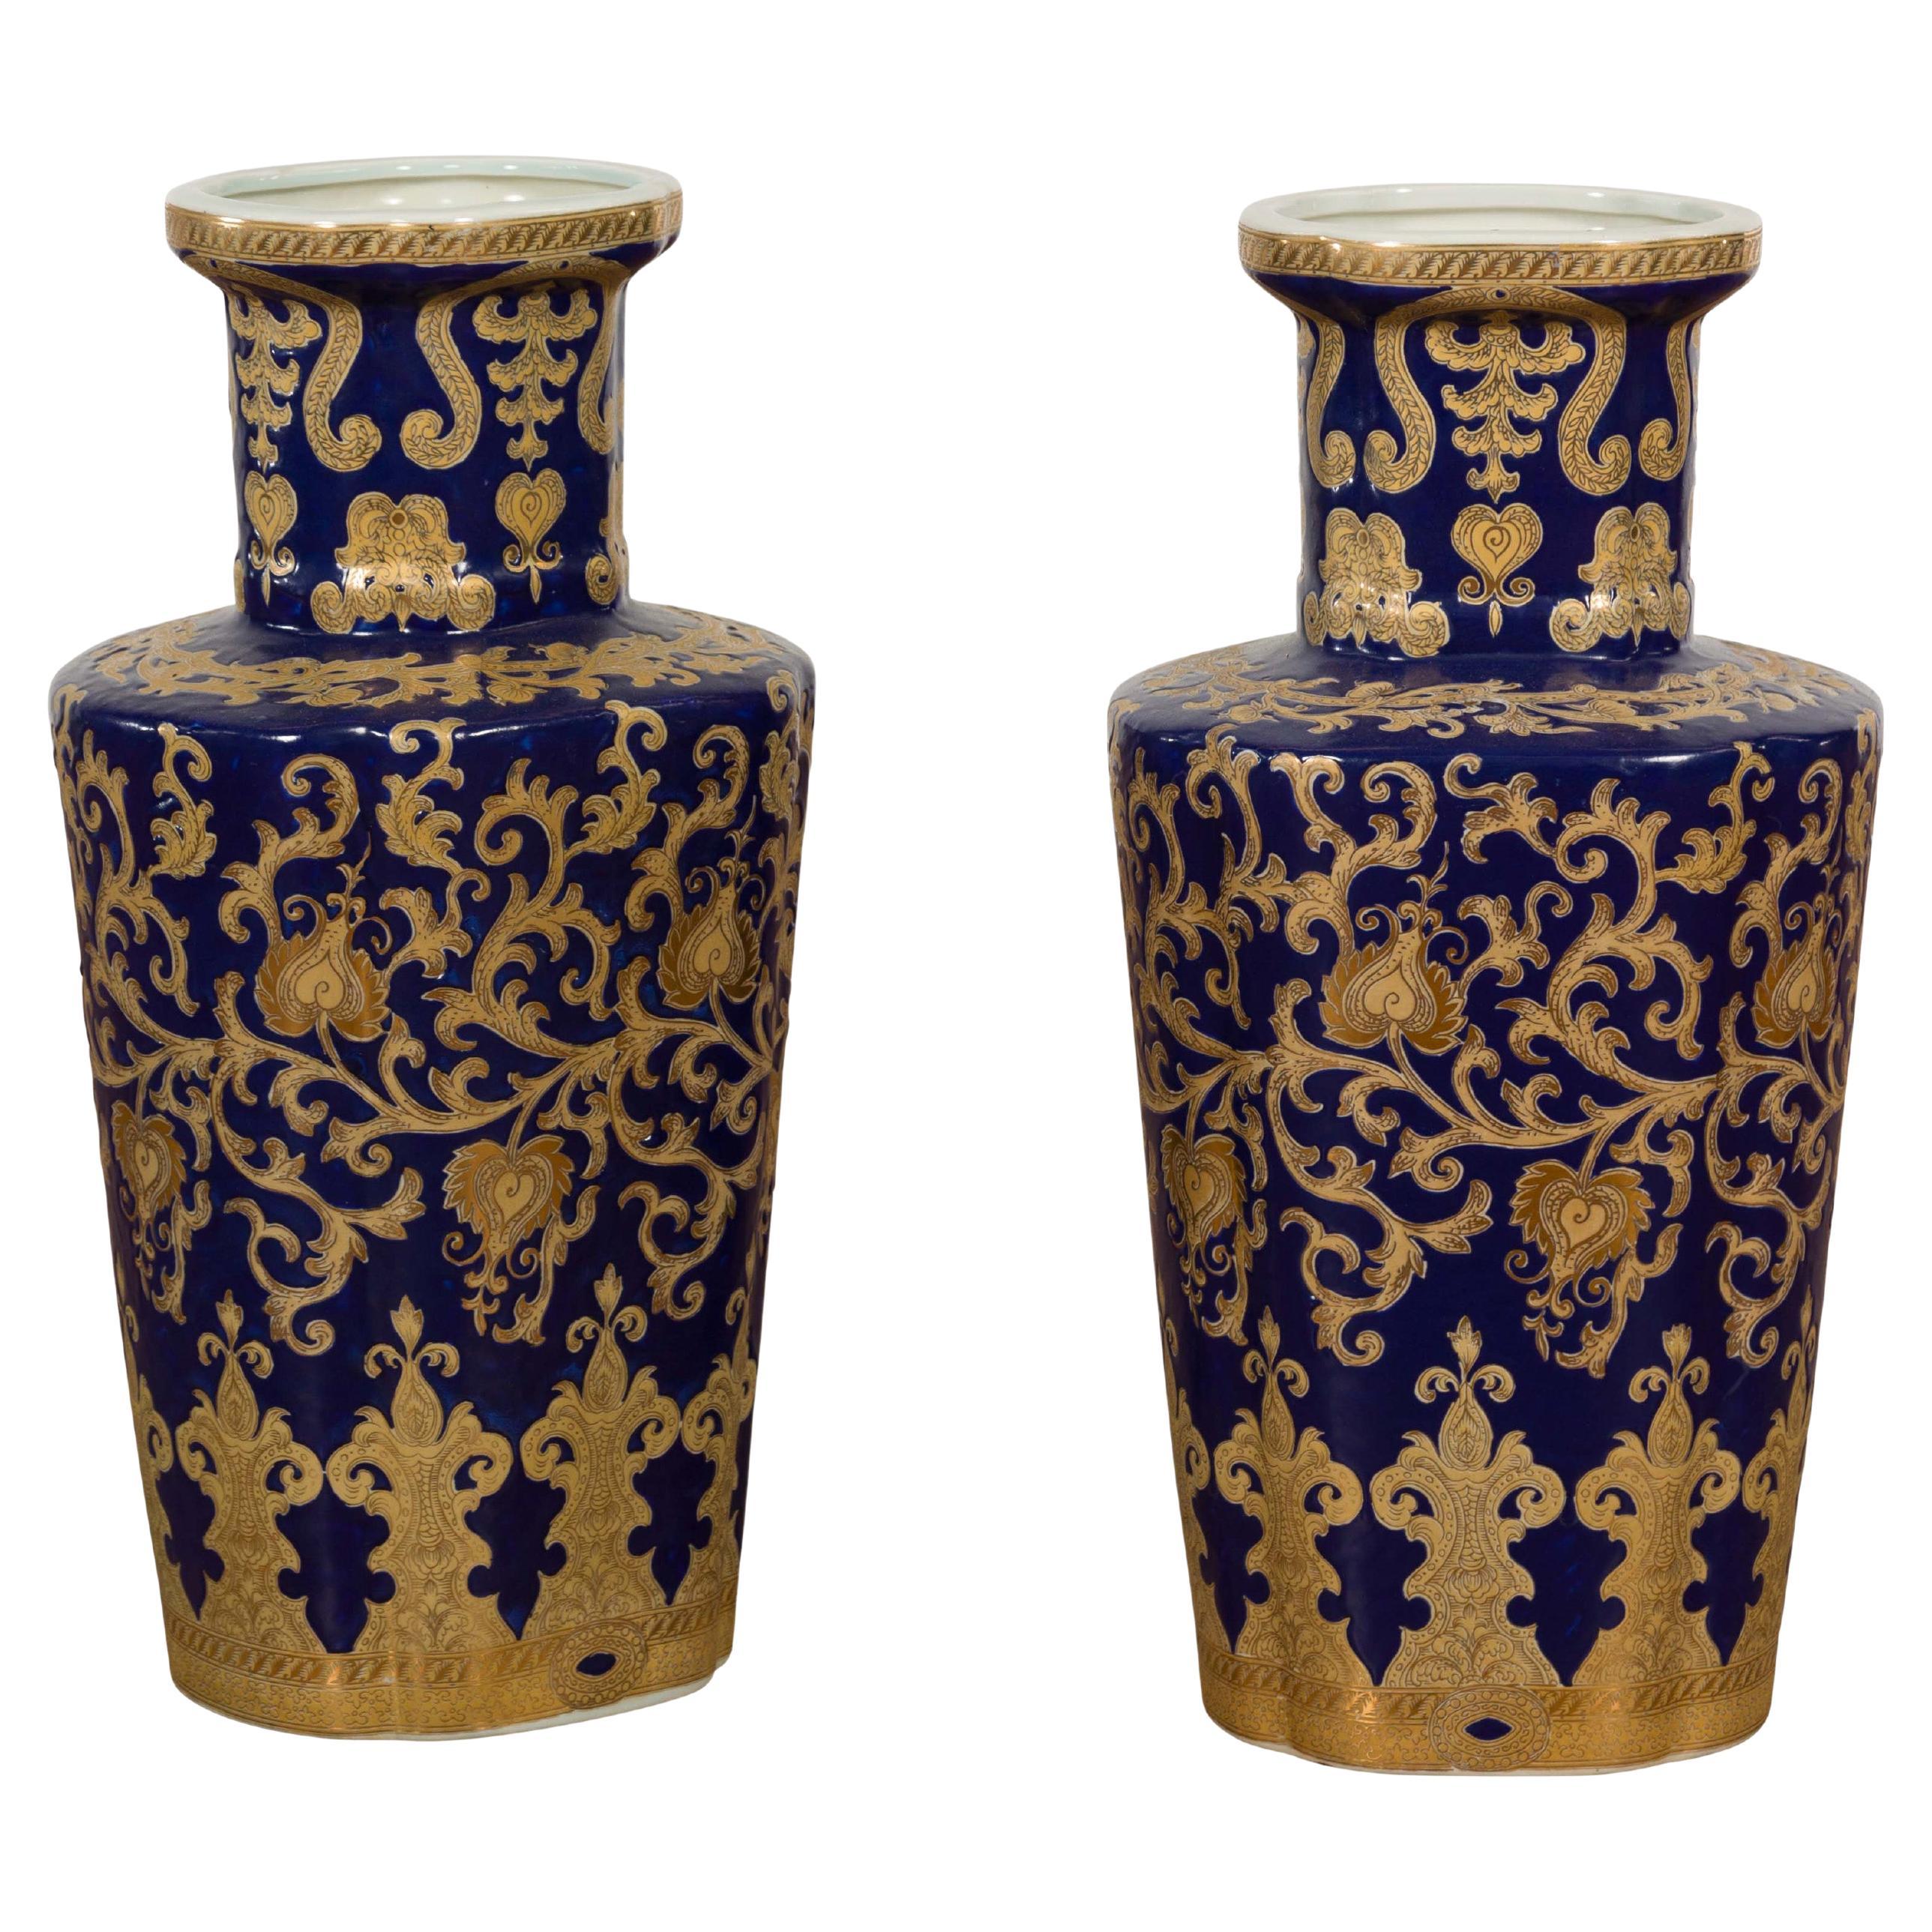 Pair of Dark Blue and Gold Vintage Vases with Intricate Design For Sale